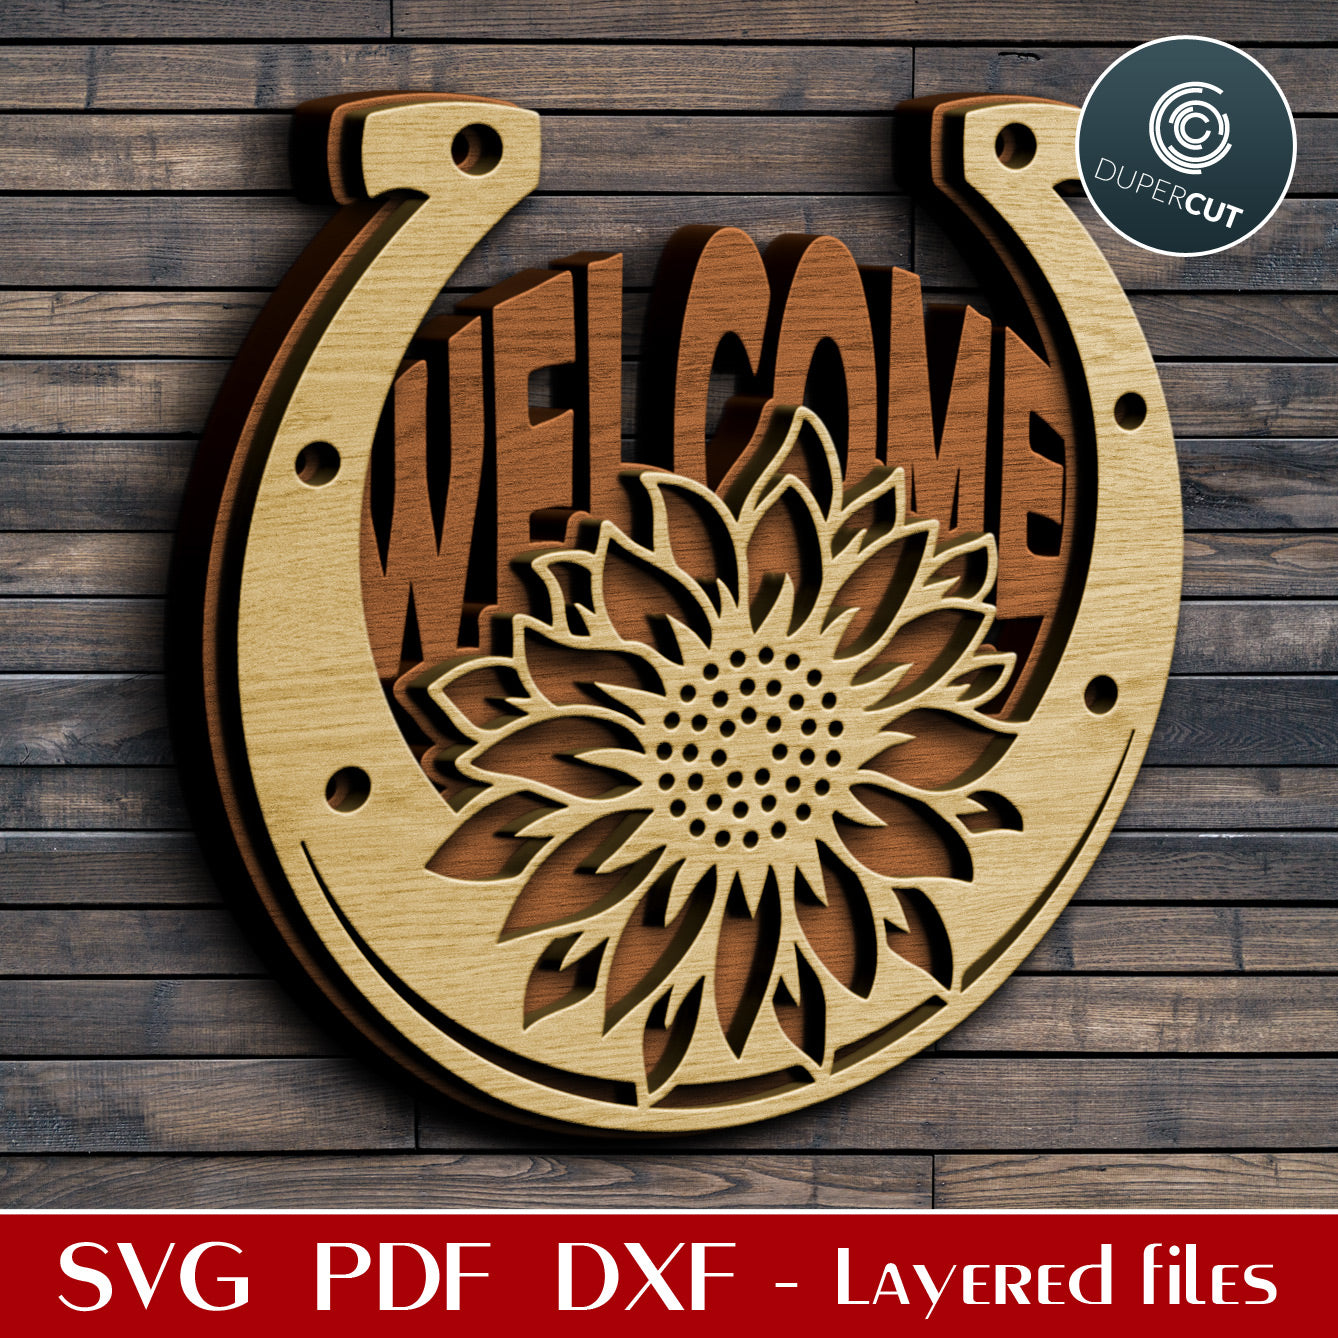 Welcome signs bundle - sunflower horseshoe - dual layer laser cutting files - SVG PDF DXF vector designs for Glowforge, Cricut, Silhouette Cameo, CNC plasma machines by DuperCut